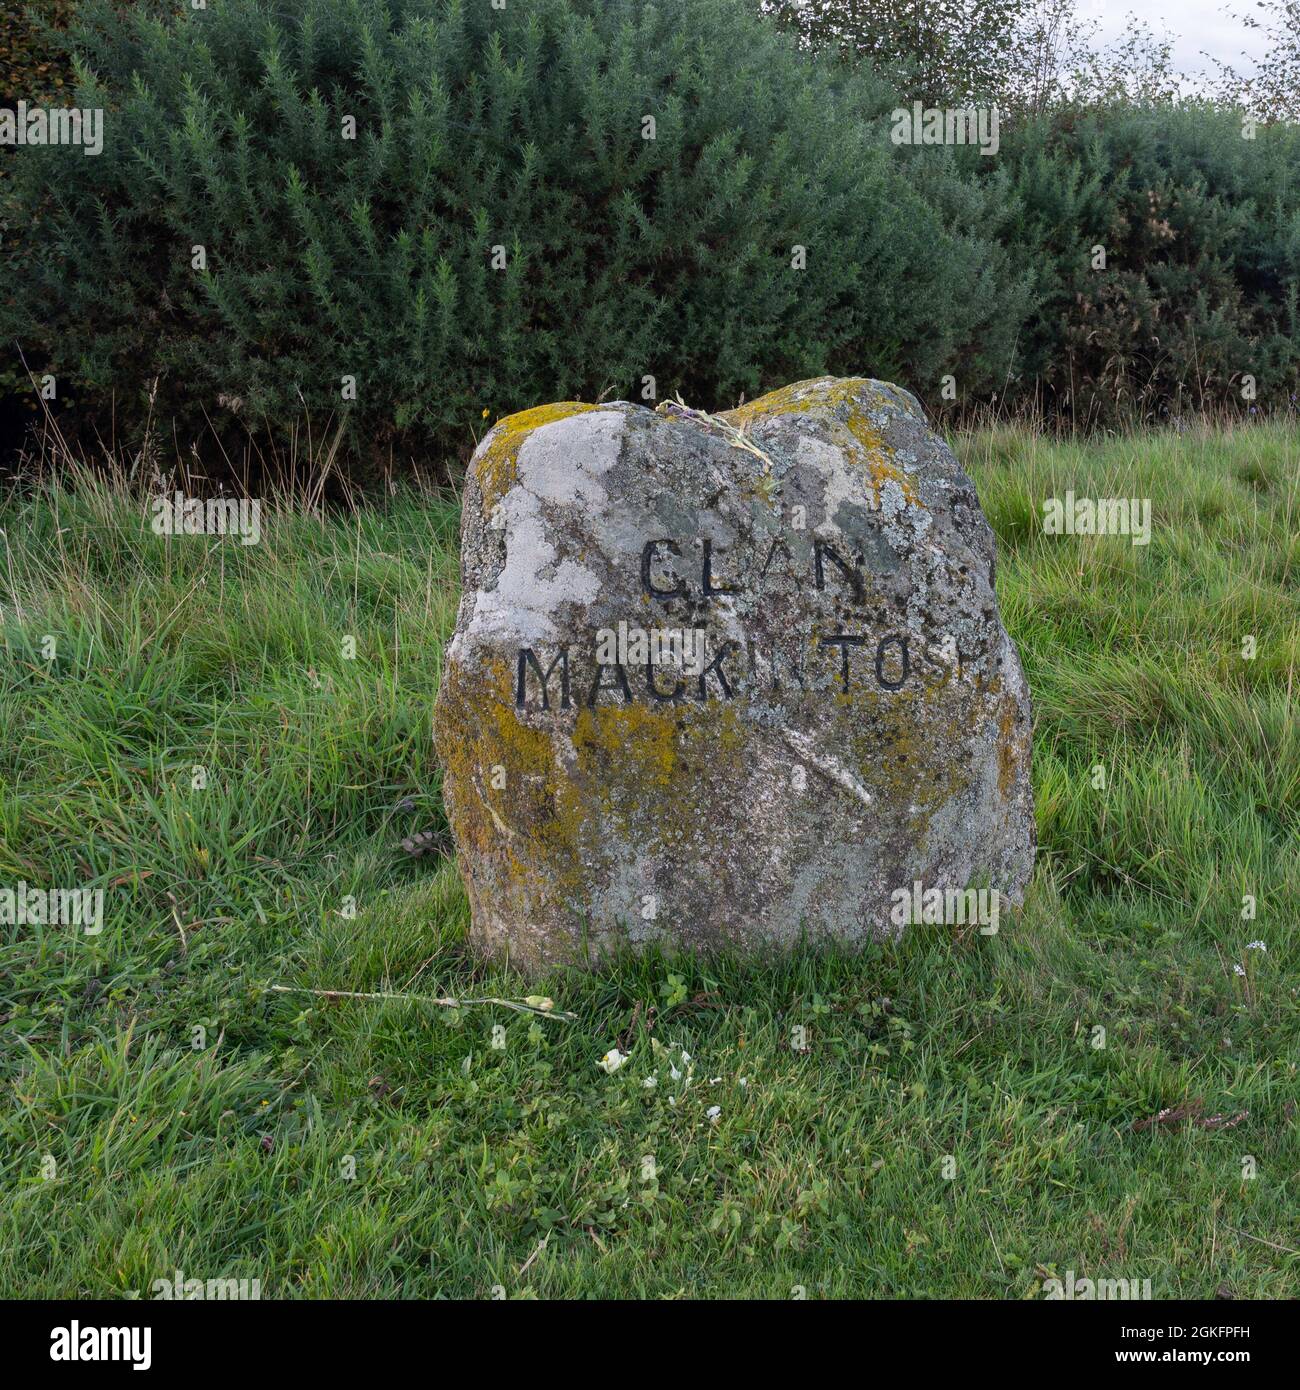 Culloden battlefield in Scotland. Isolated headstone for Clan Mackintosh with background of grass and other greenery. Stock Photo